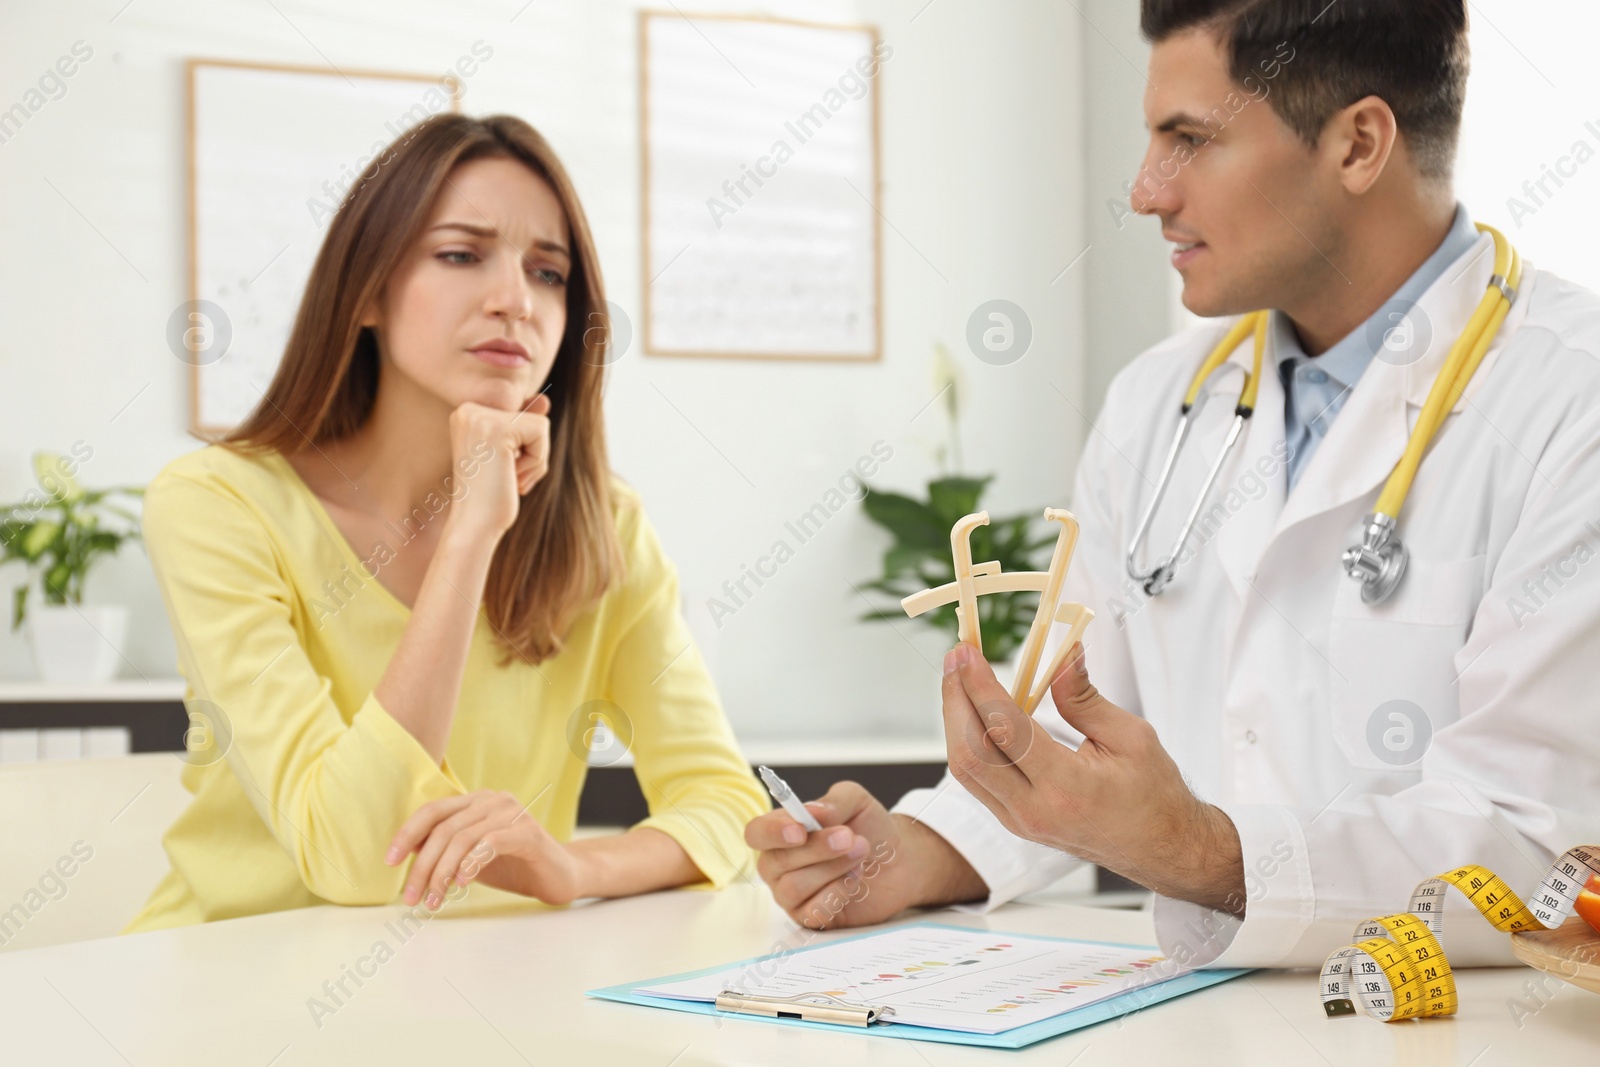 Photo of Nutritionist consulting patient at table in clinic, focus on hands